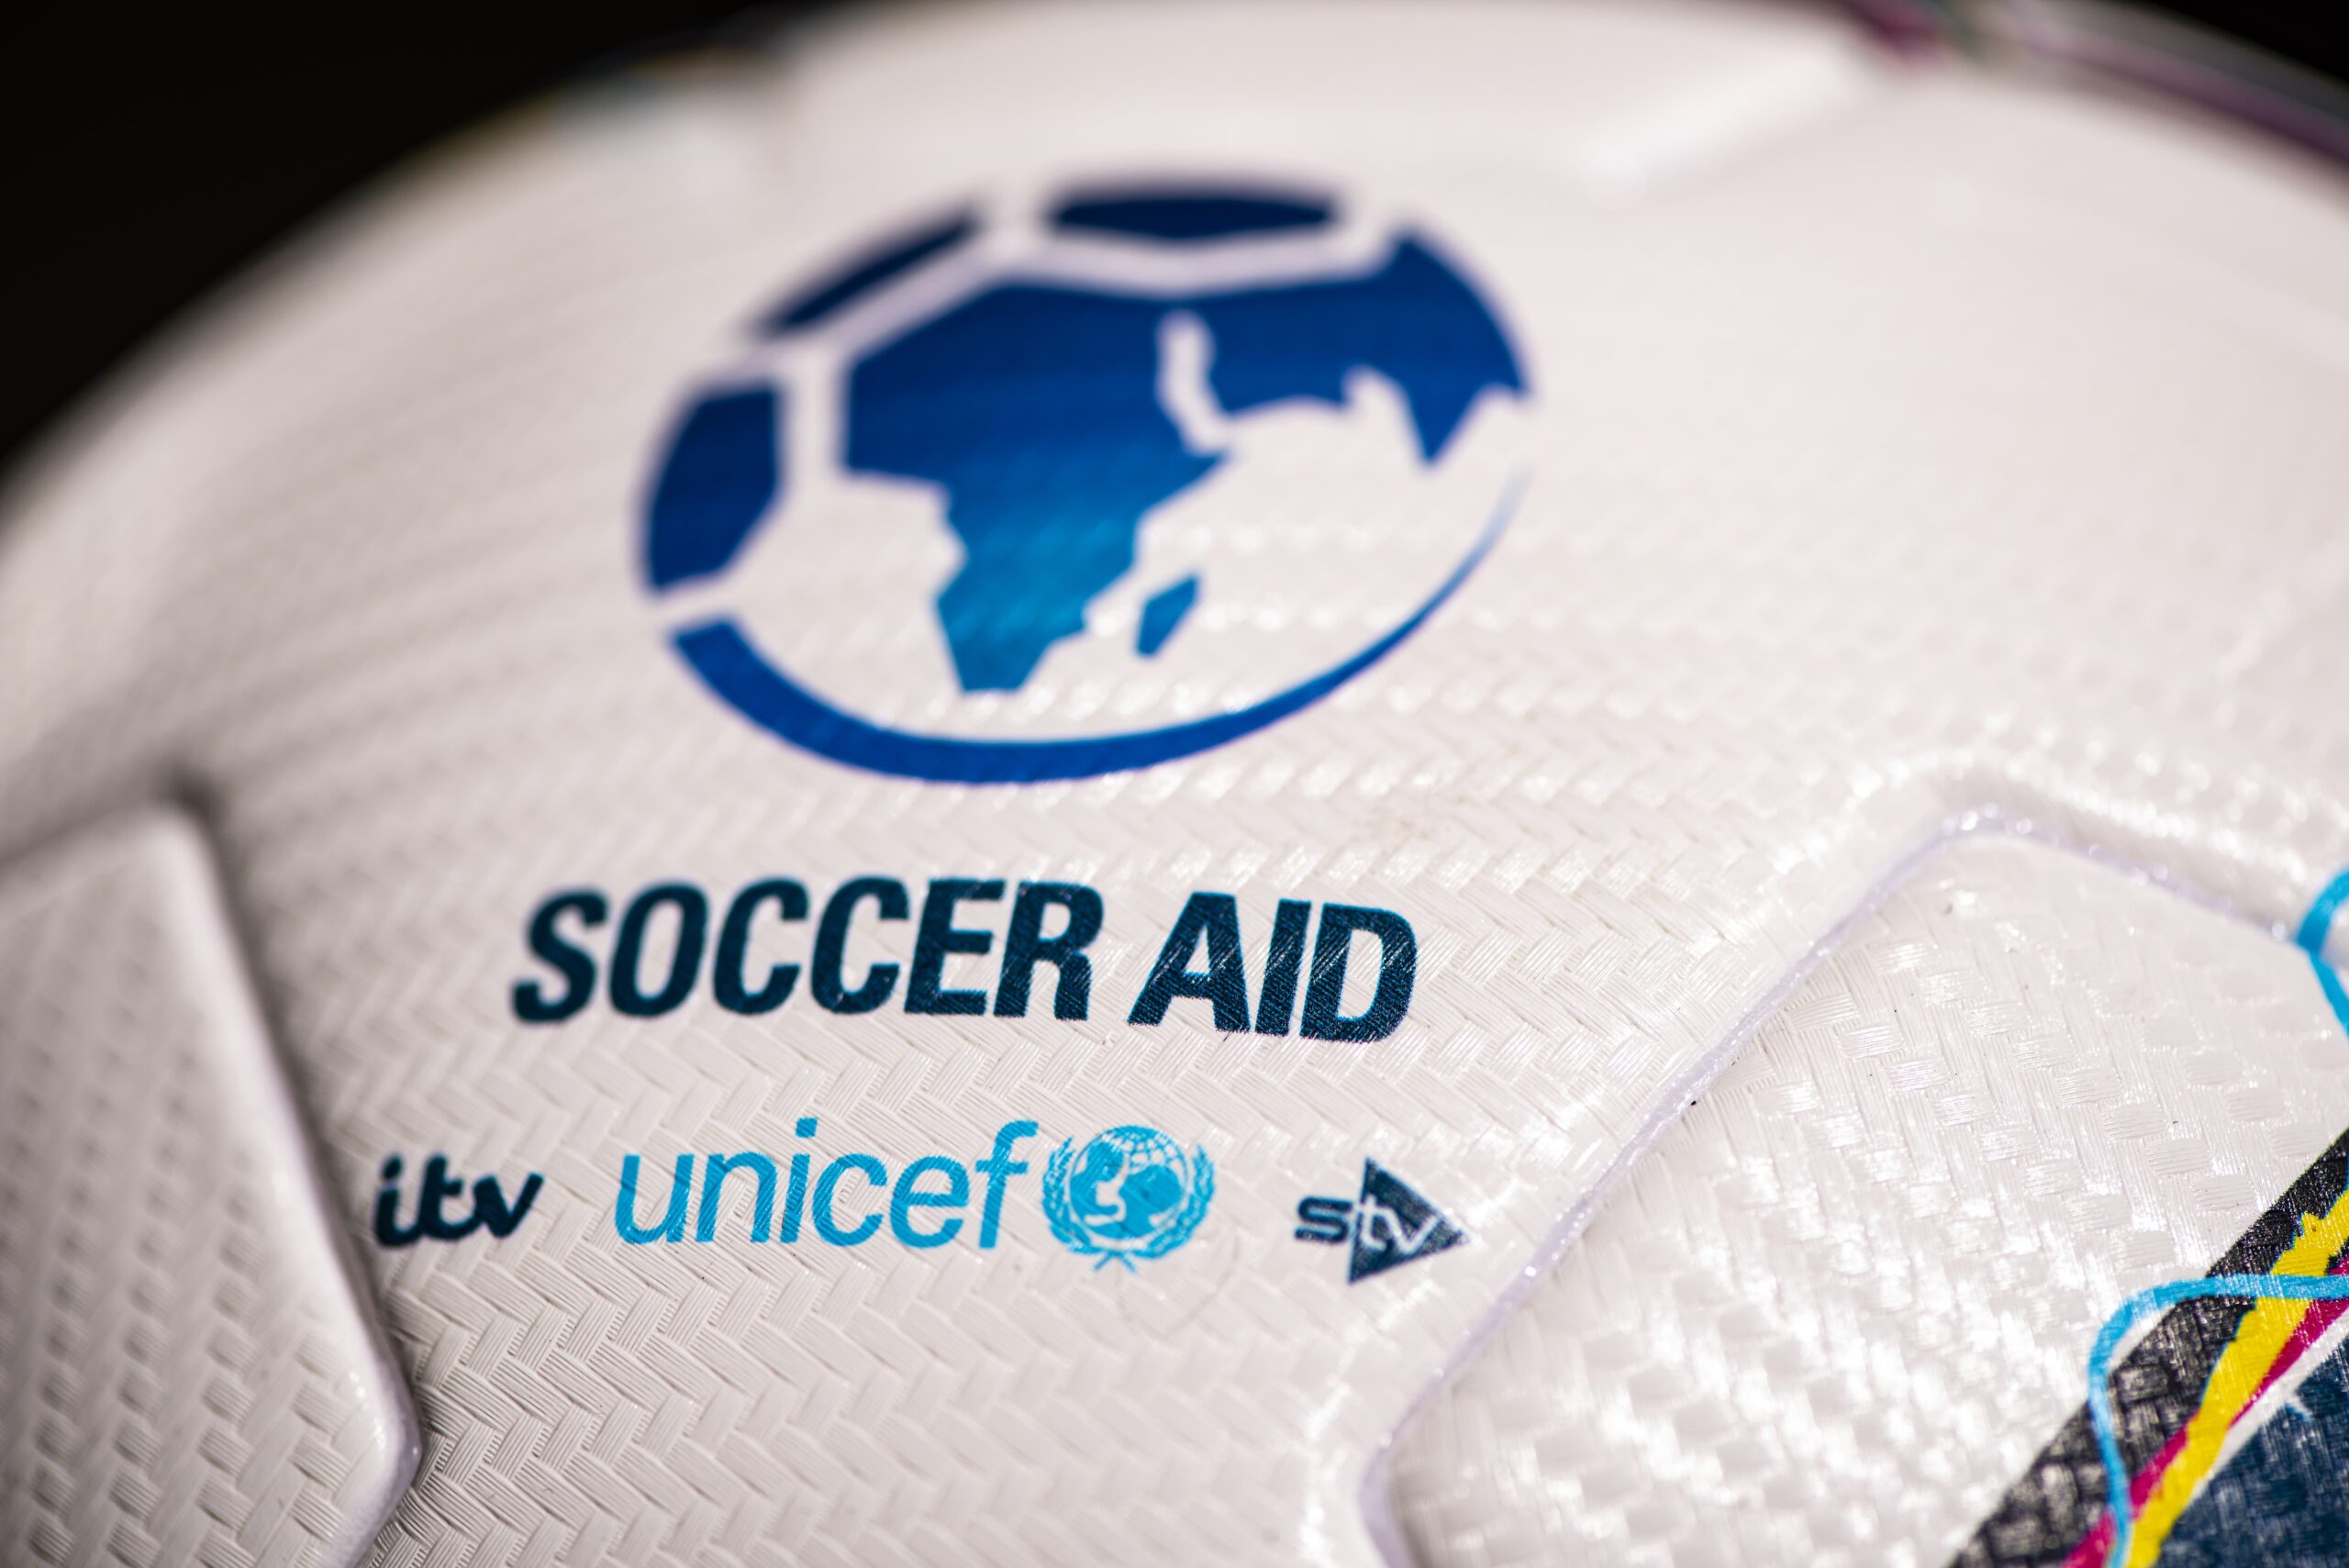 Soccer aid for unicef 2020 live on itv this weekend